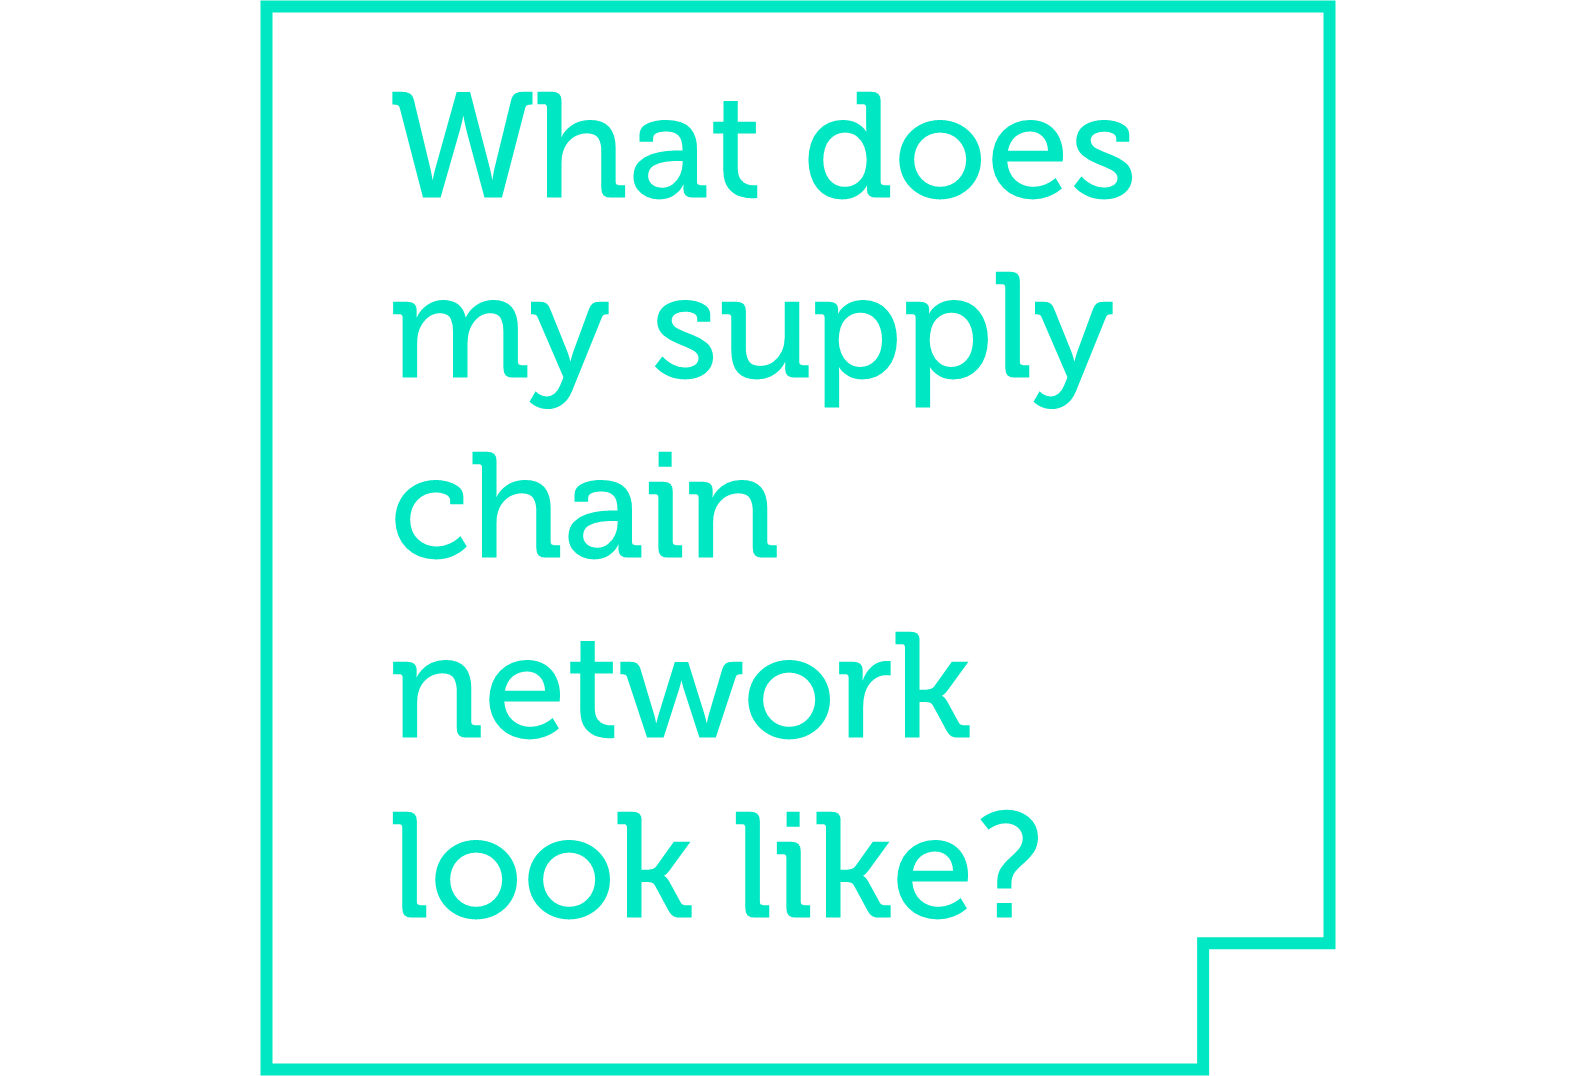 Axon: What does my supply chain network look like?